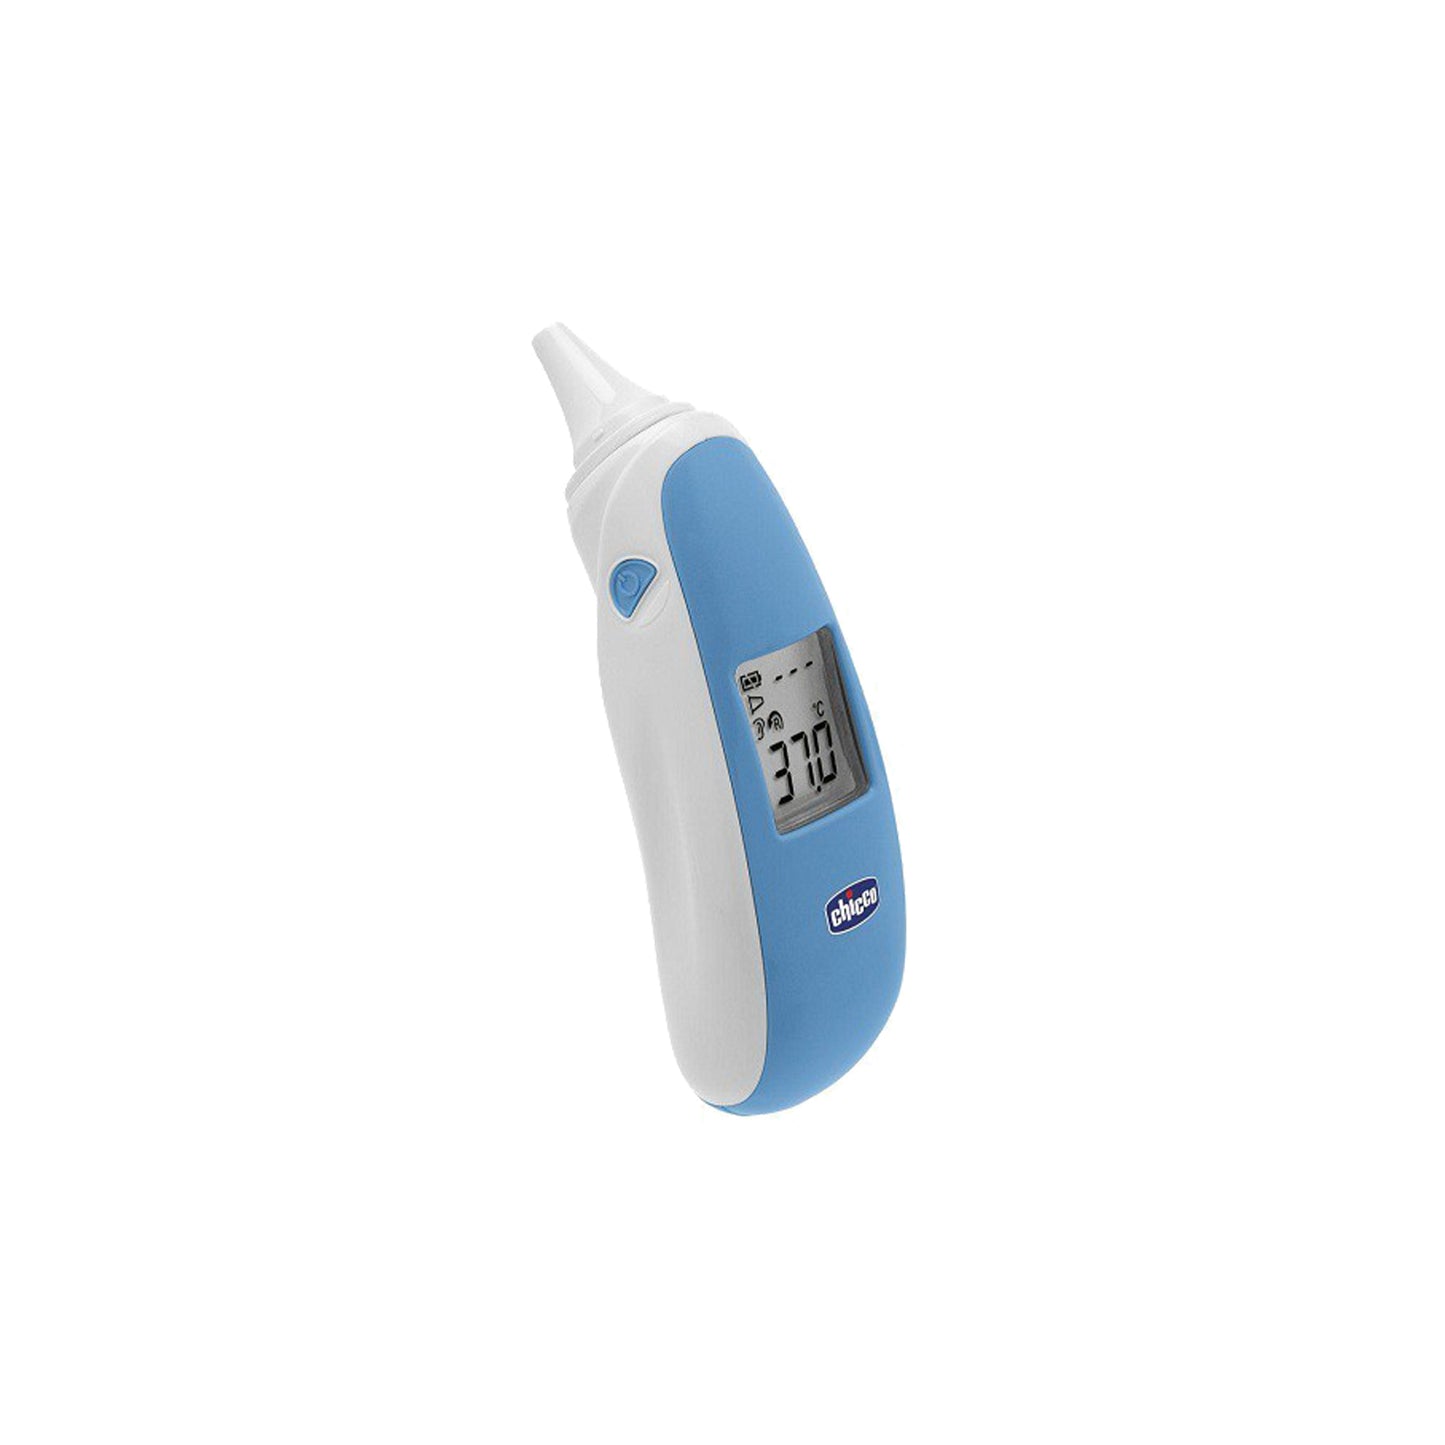 Chicco - Comfort Quick infrared thermometer